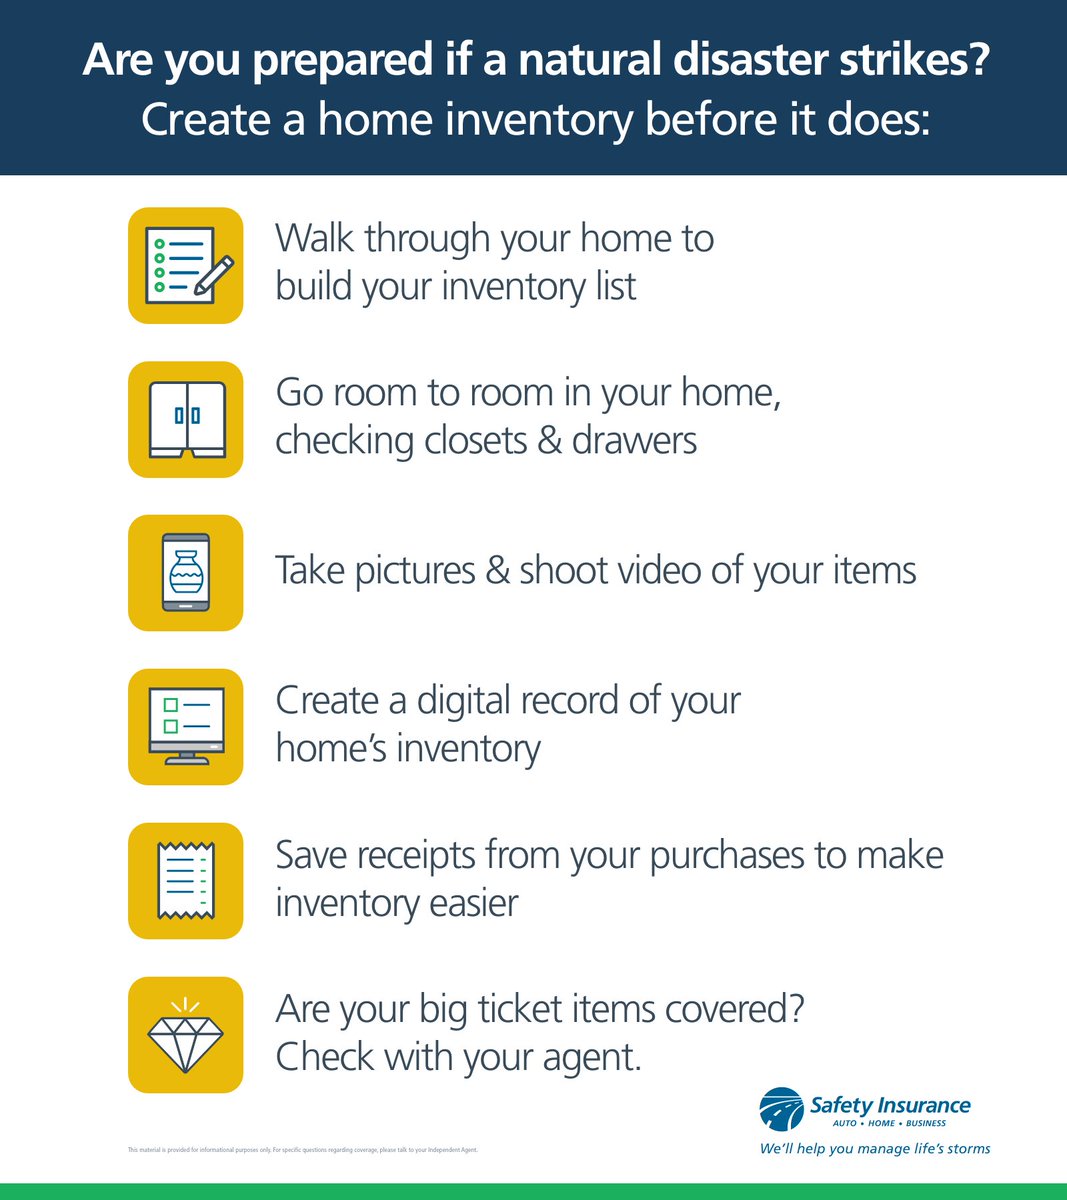 How to inventory your home #ManageLifesStorms #homeinventory #hurricaneseason